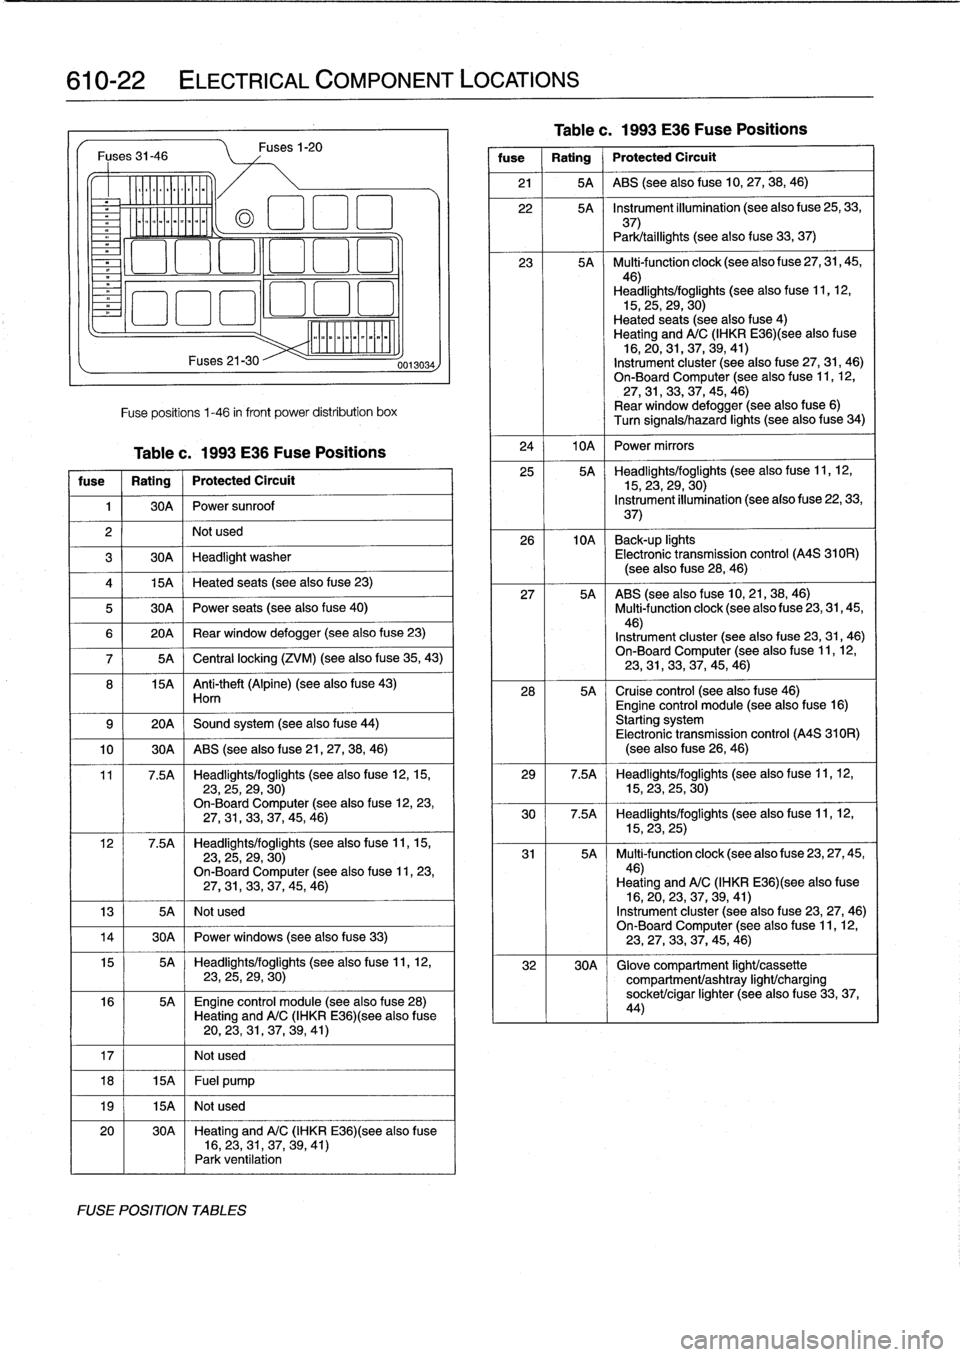 BMW 318i 1997 E36 Workshop Manual 
610-22

	

ELECTRICAL
COMPONENT
LOCATIONS

Fuses
31-46

Ylililll

milililil
Fuses
21-30
Fuse
positions
1-46
in
front
Power
distribution
box

Table
c
.
1993
E36
Fuse
Positions

fuse

	

1
Rating

	

j